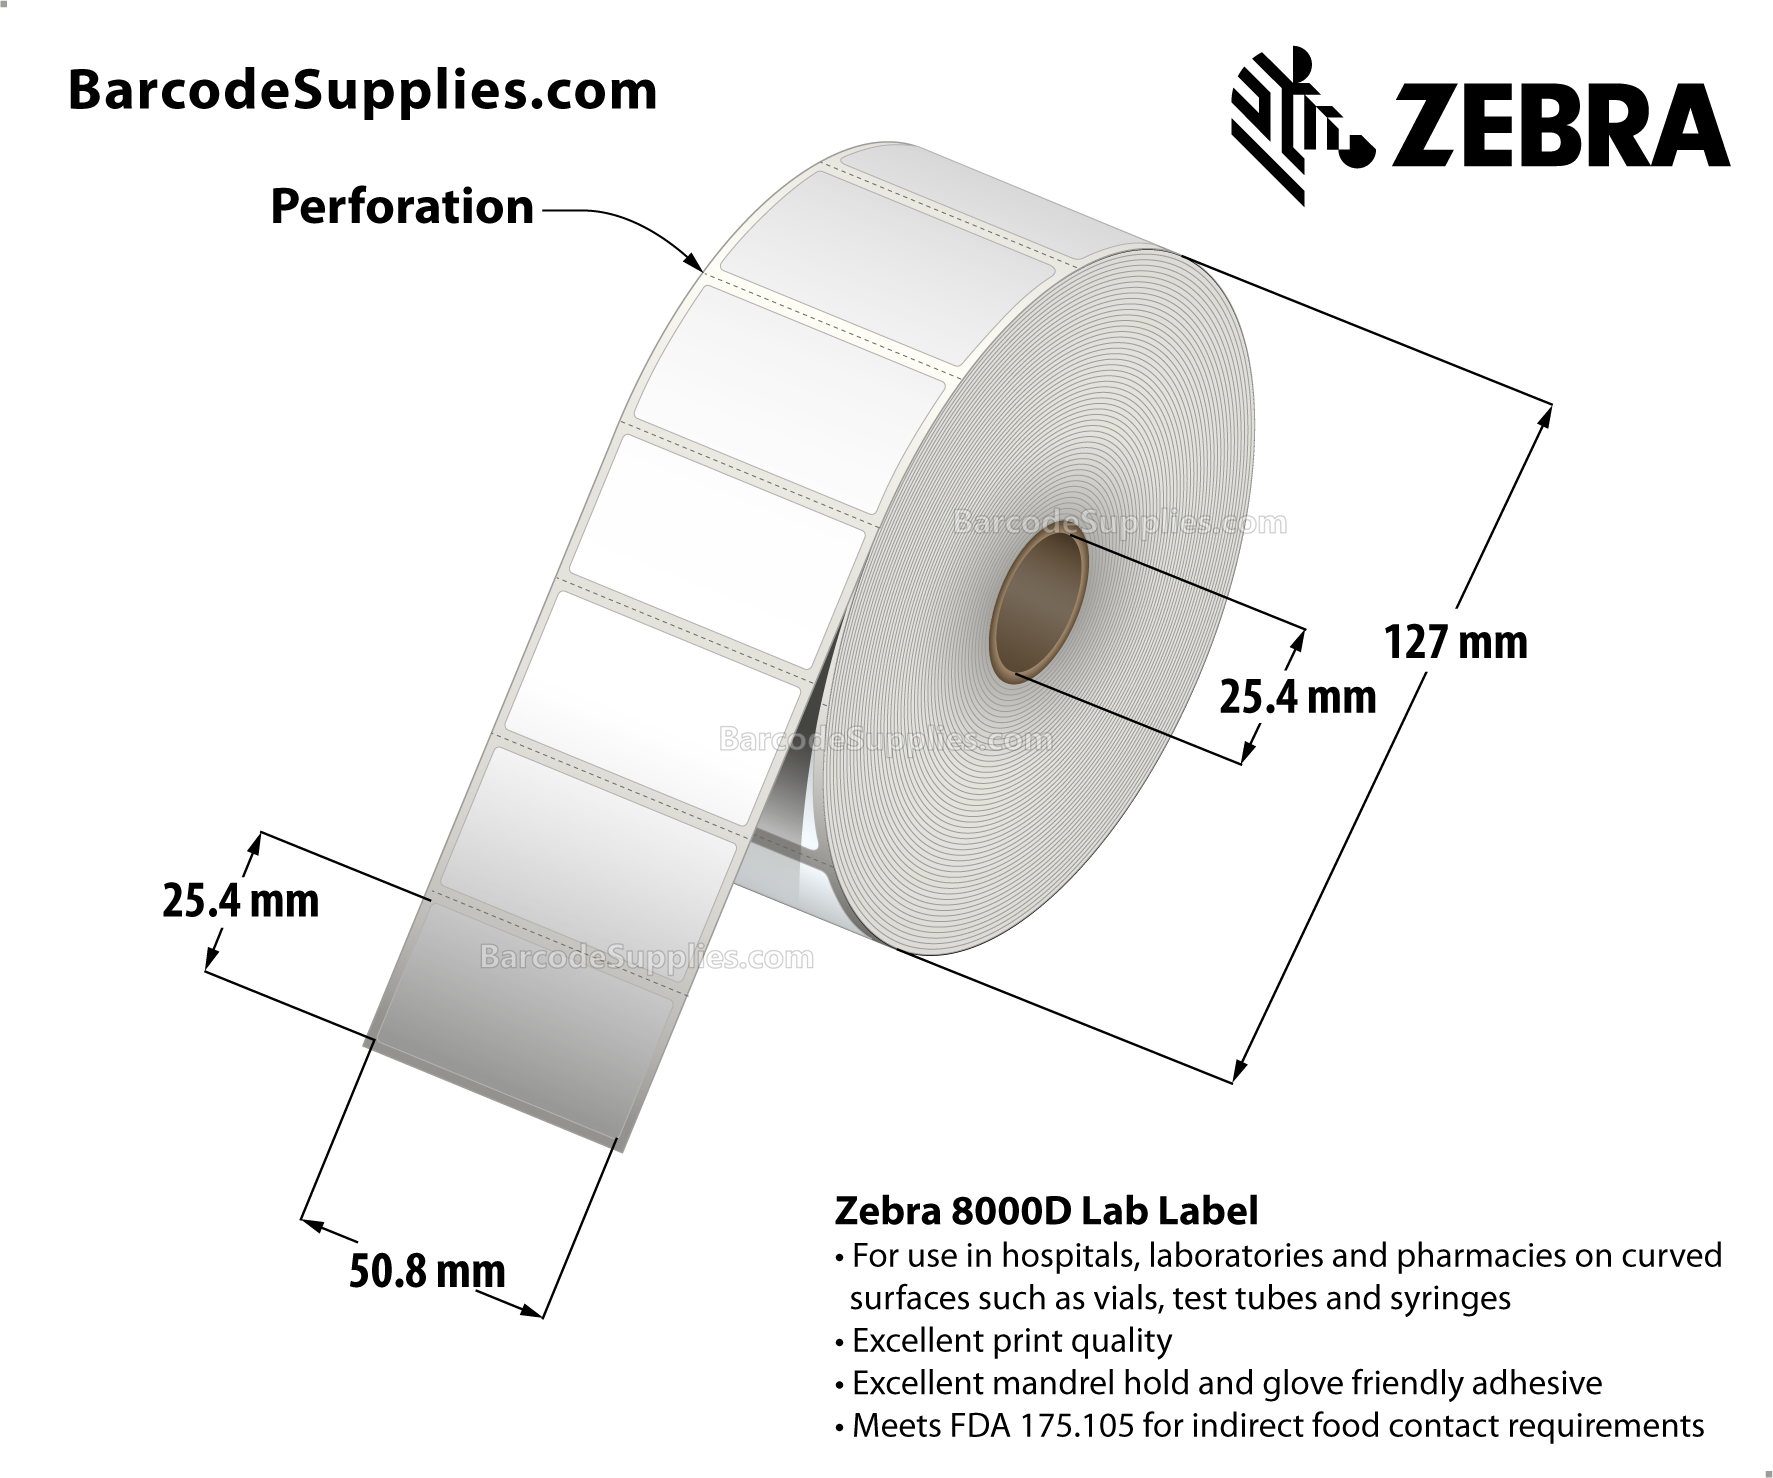 2 x 1 Direct Thermal White 8000D Lab Labels With Permanent Adhesive - Perforated - 2330 Labels Per Roll - Carton Of 6 Rolls - 13980 Labels Total - MPN: 10028318